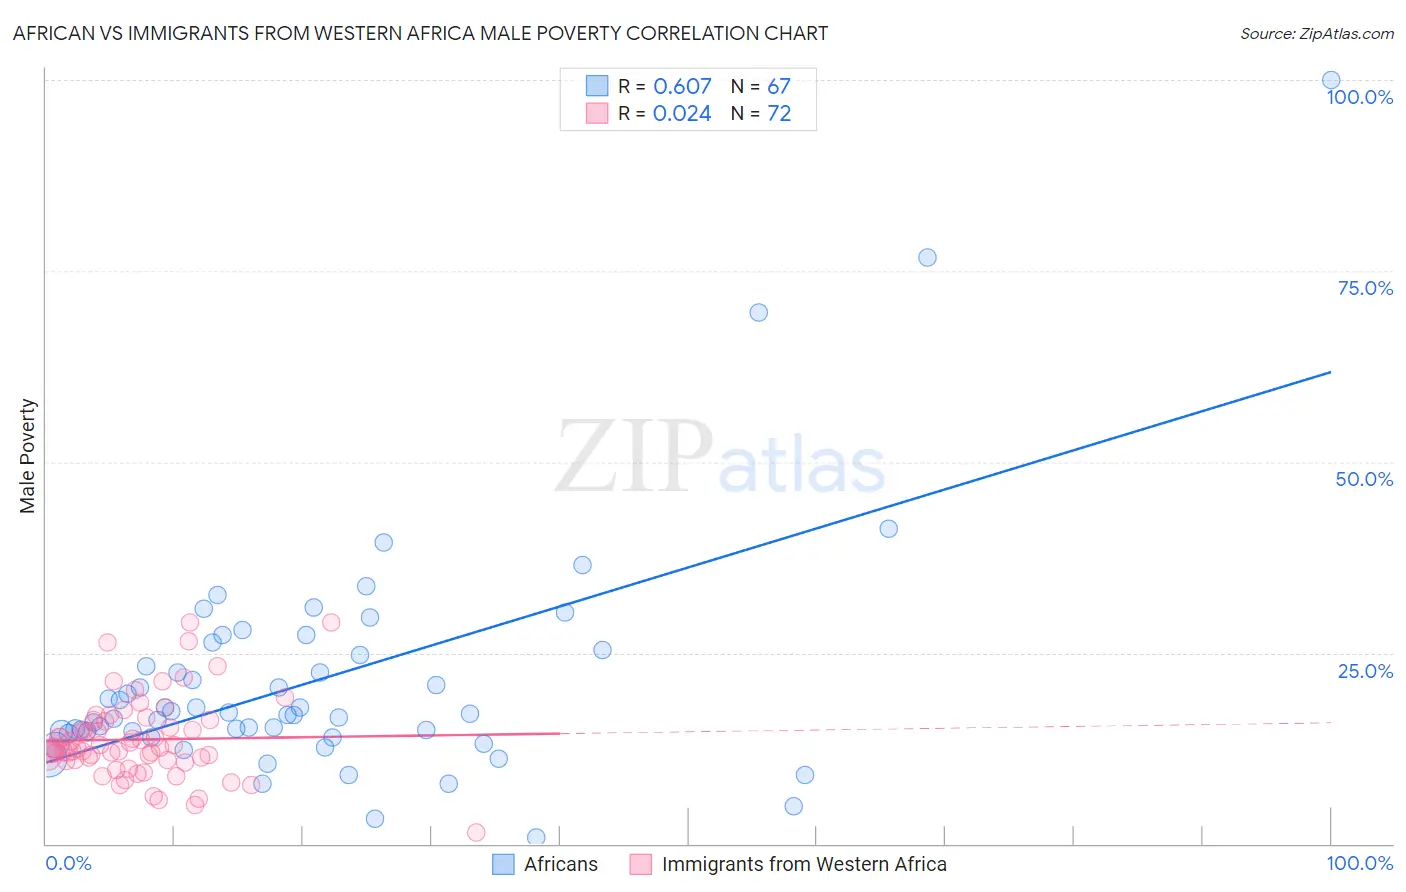 African vs Immigrants from Western Africa Male Poverty